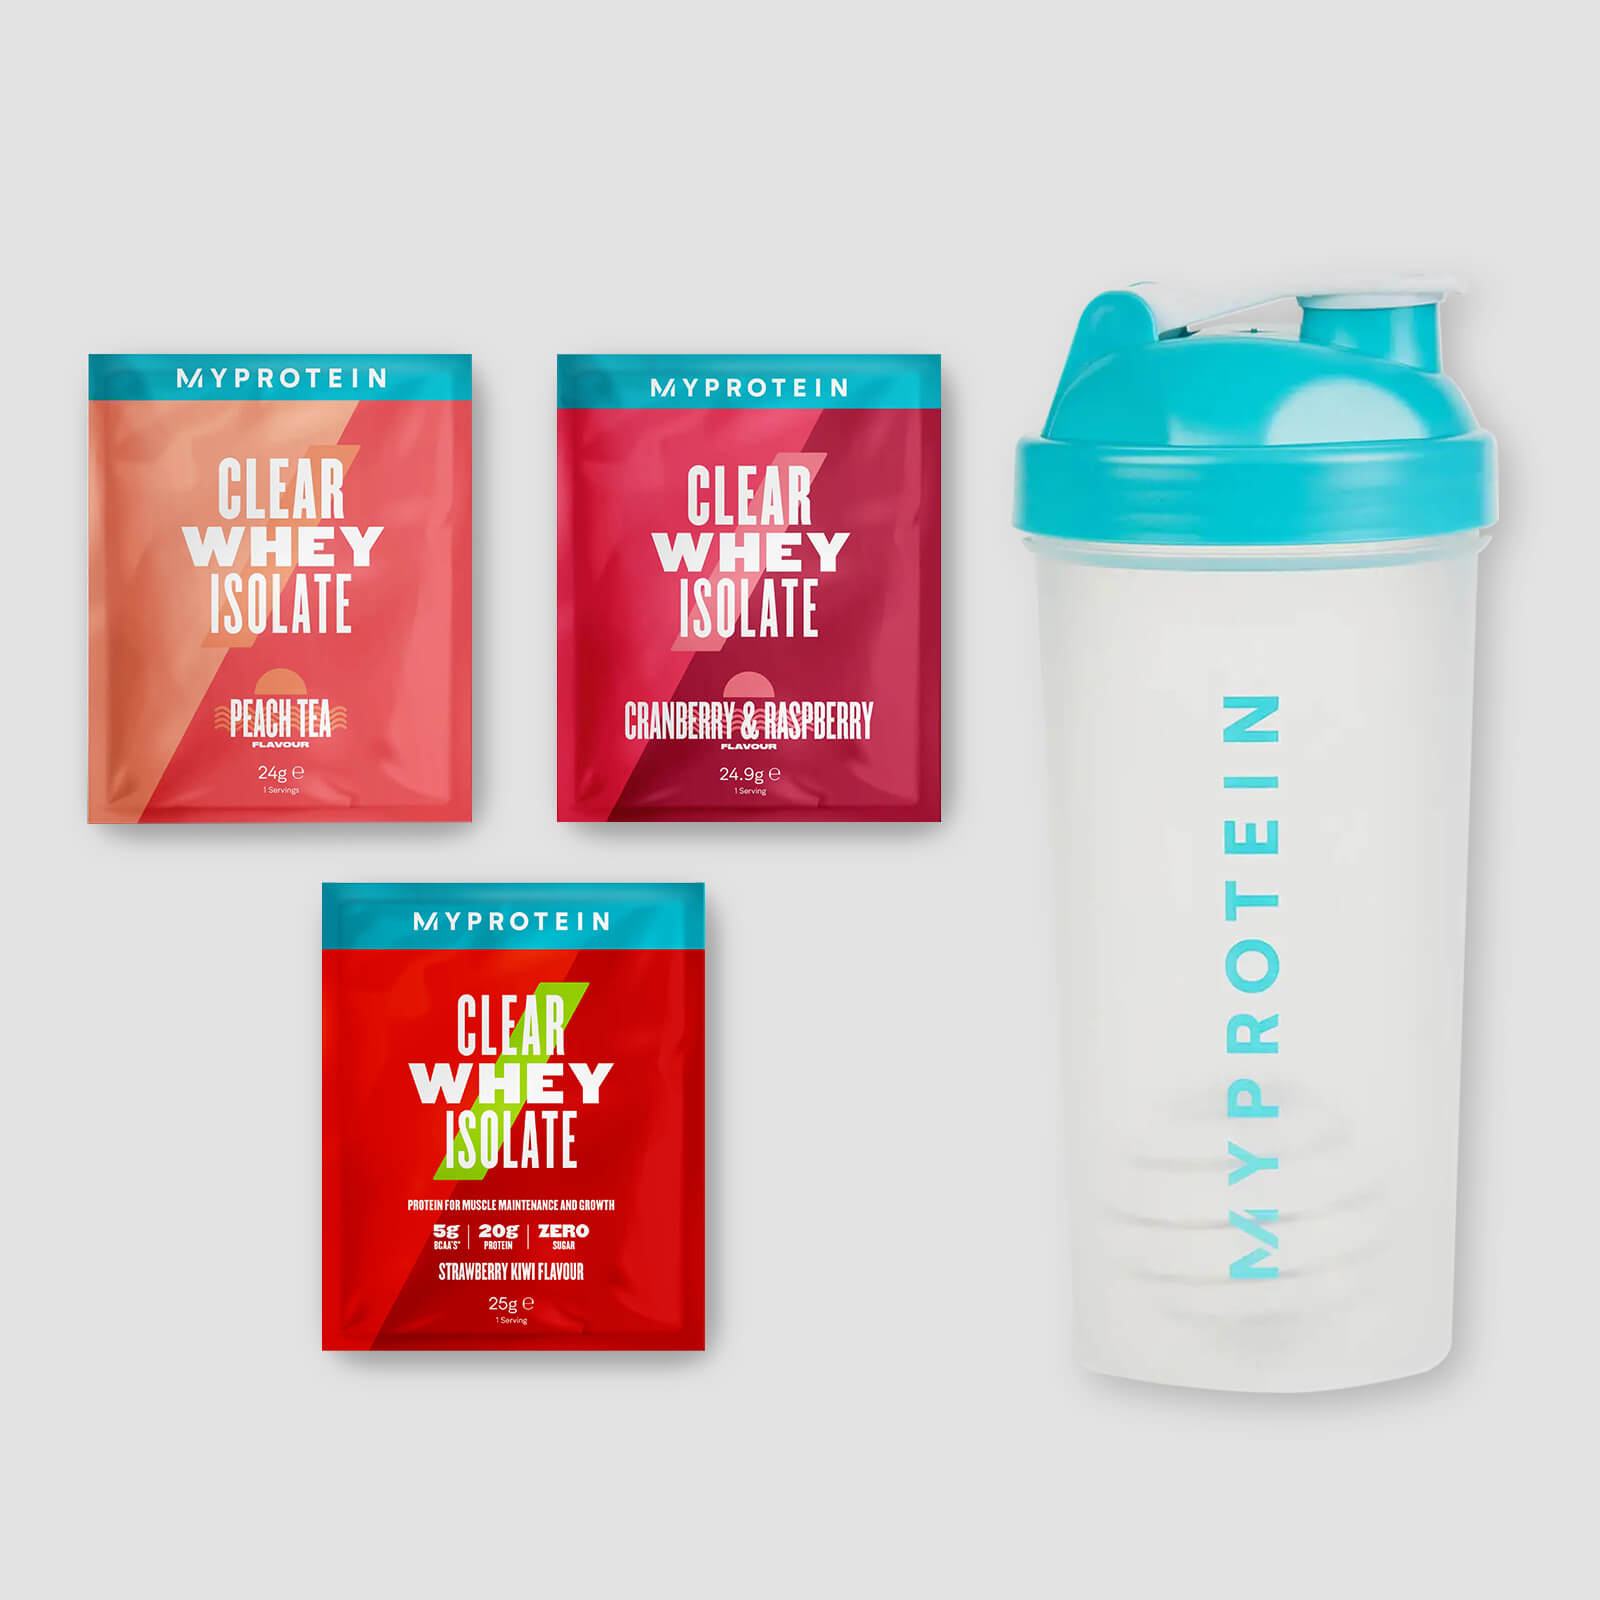 Myprotein Clear Whey Isolate Starter Pack